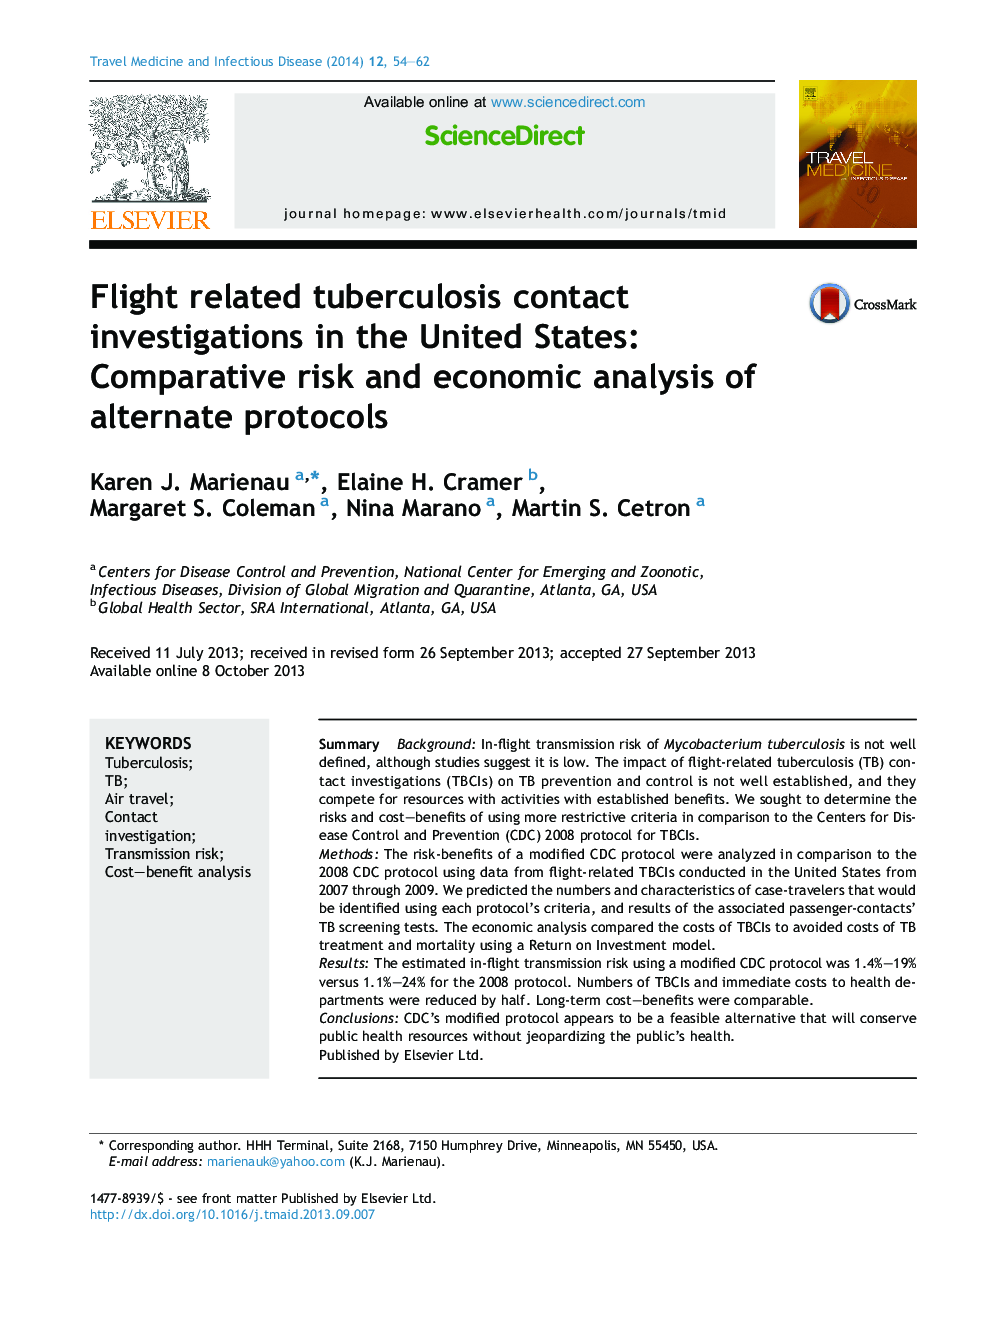 Flight related tuberculosis contact investigations in the United States: Comparative risk and economic analysis of alternate protocols